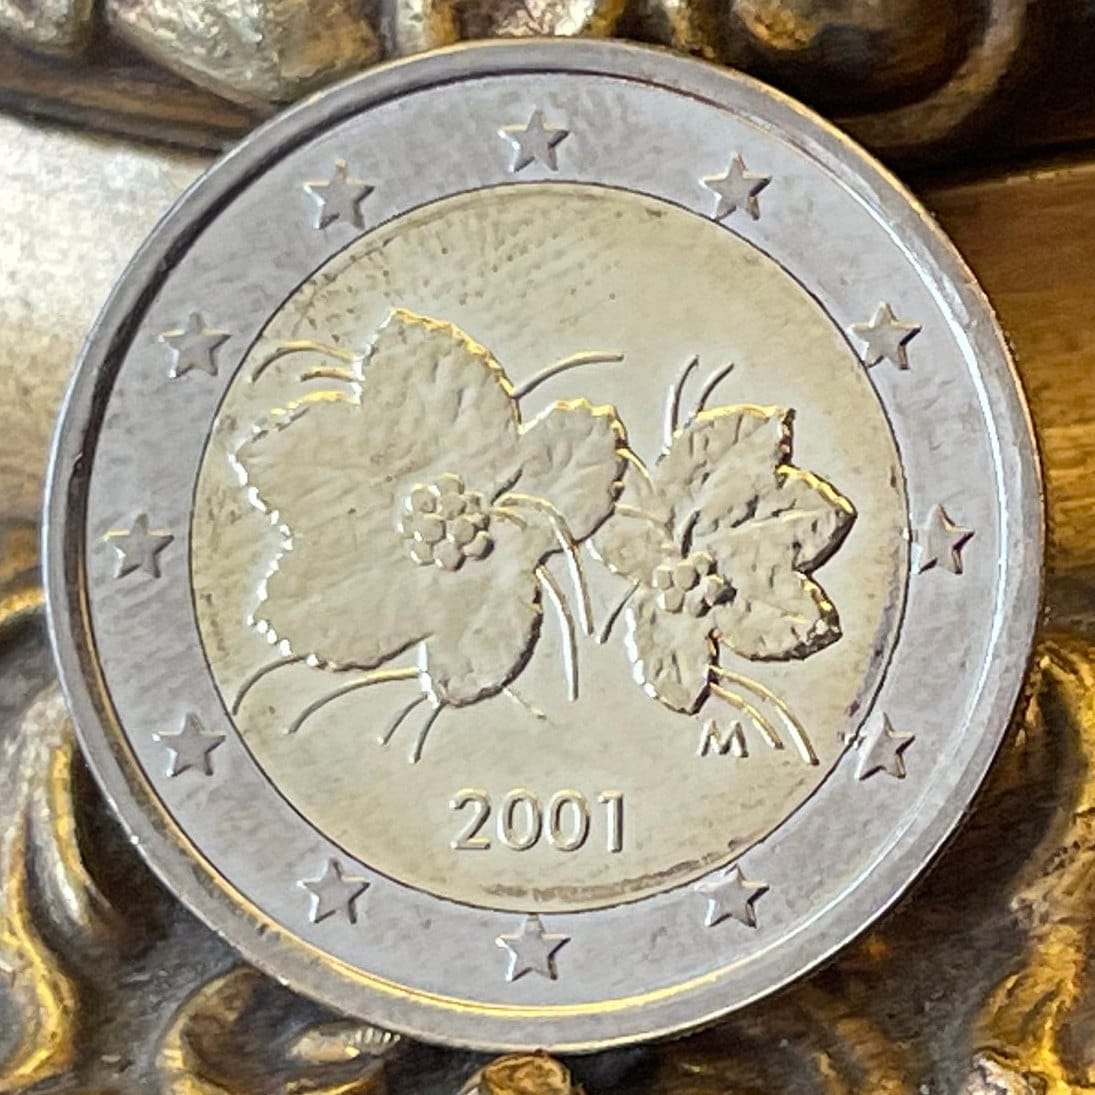 Cloudberry Flowers & Berries 2 Euros Finland Authentic Coin Money for Jewelry and Craft Making (Bimetallic)